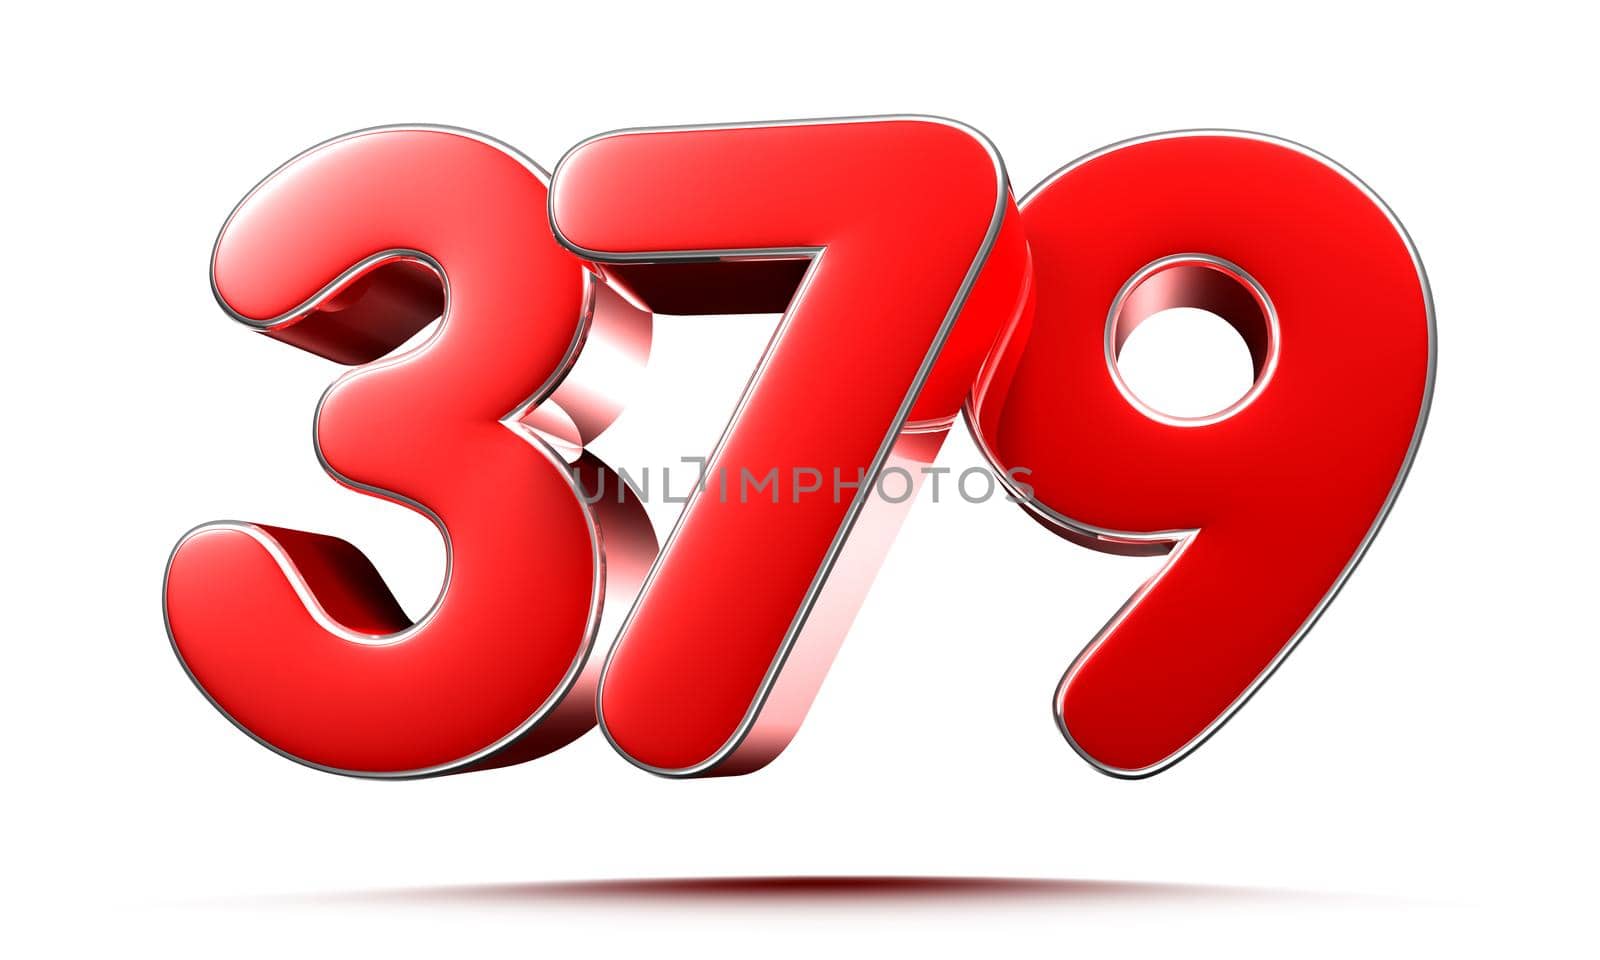 Rounded red numbers 379 on white background 3D illustration with clipping path